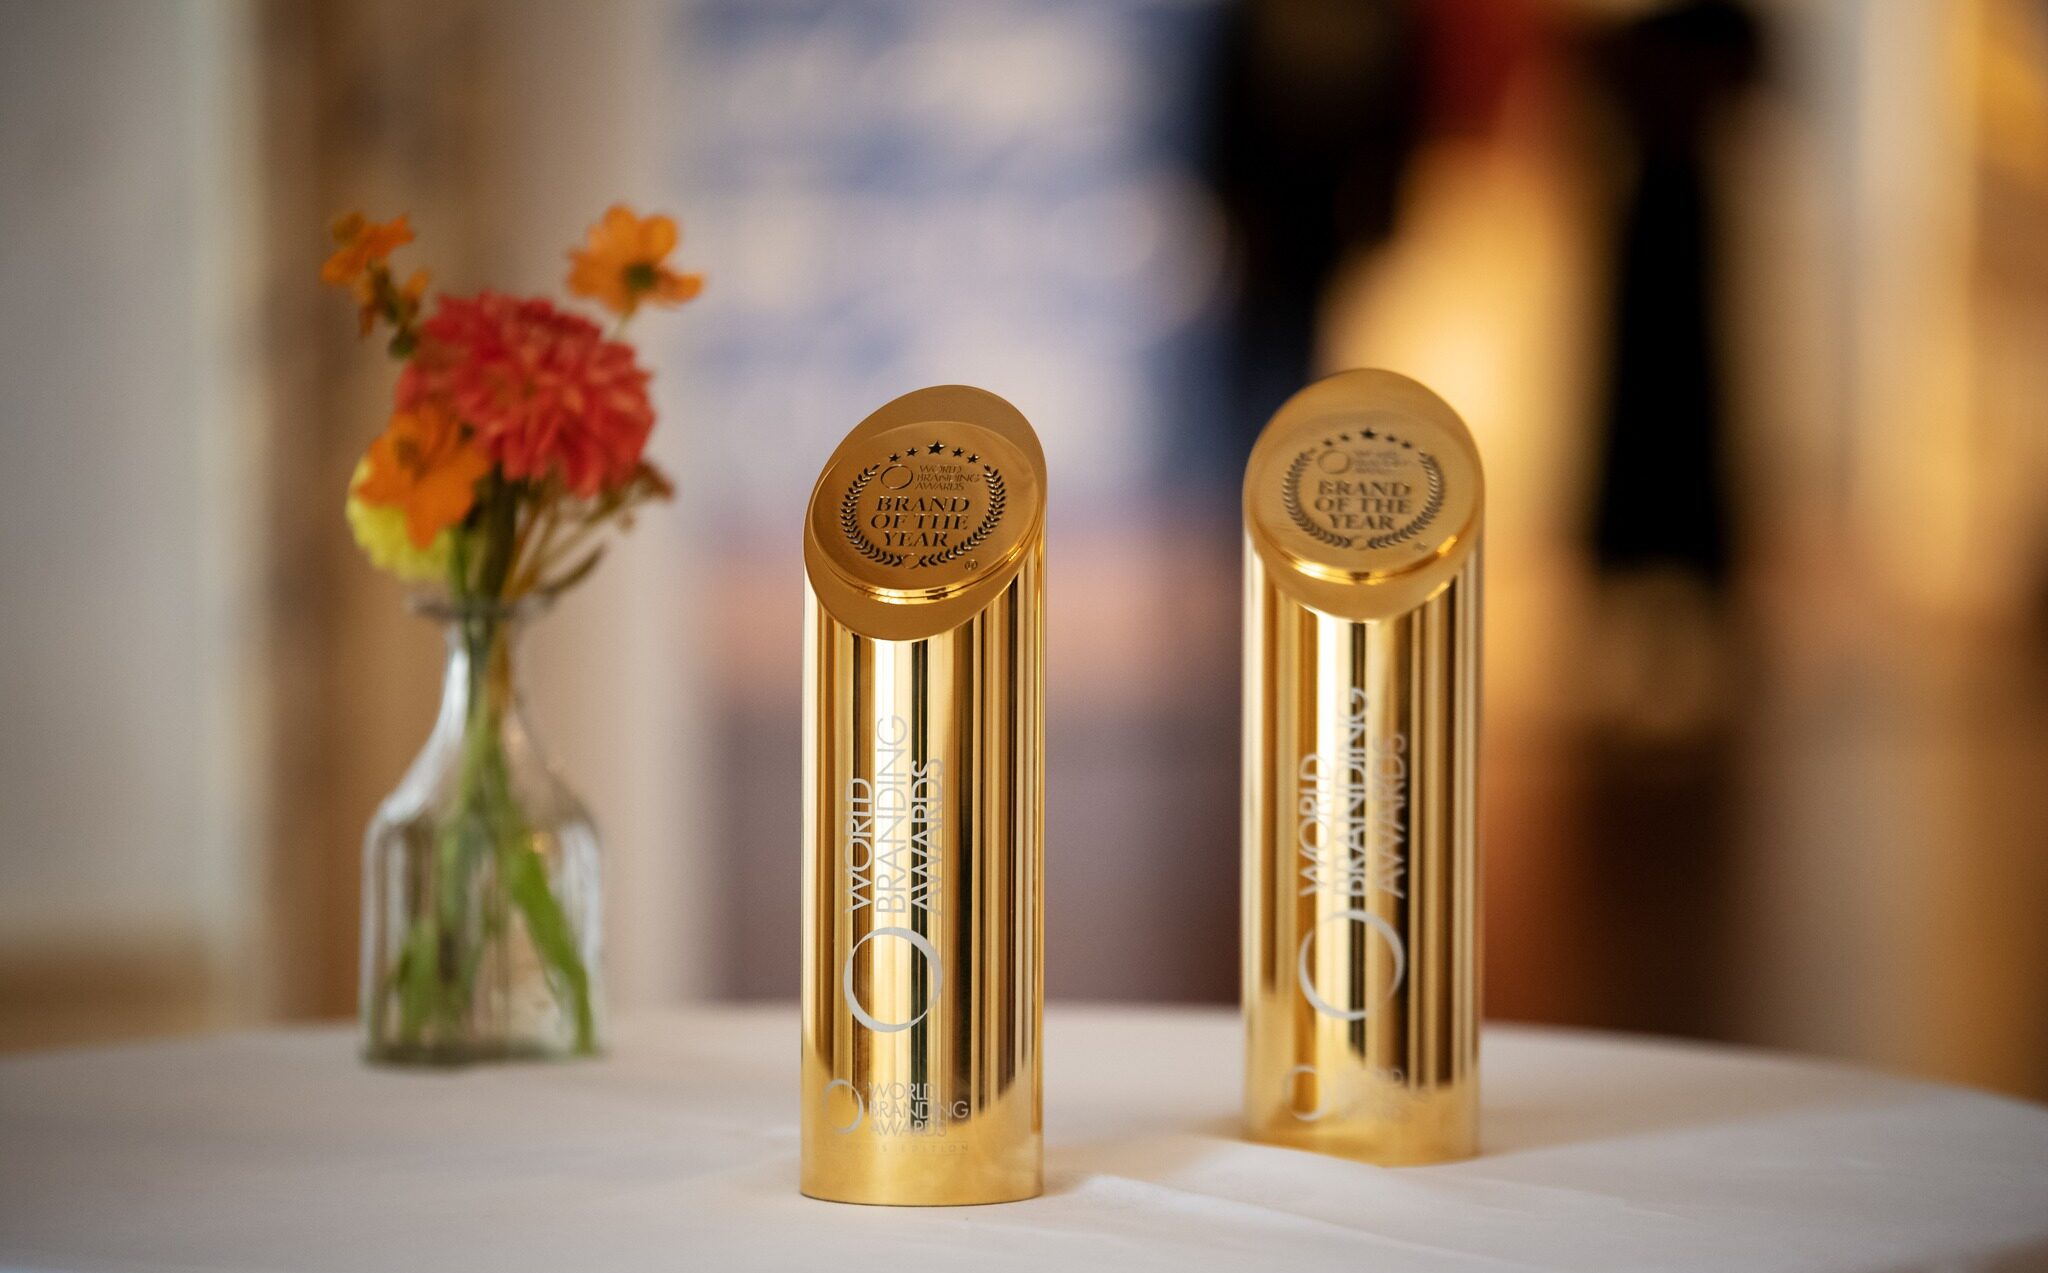 A Short History of the World Branding Awards [Video]